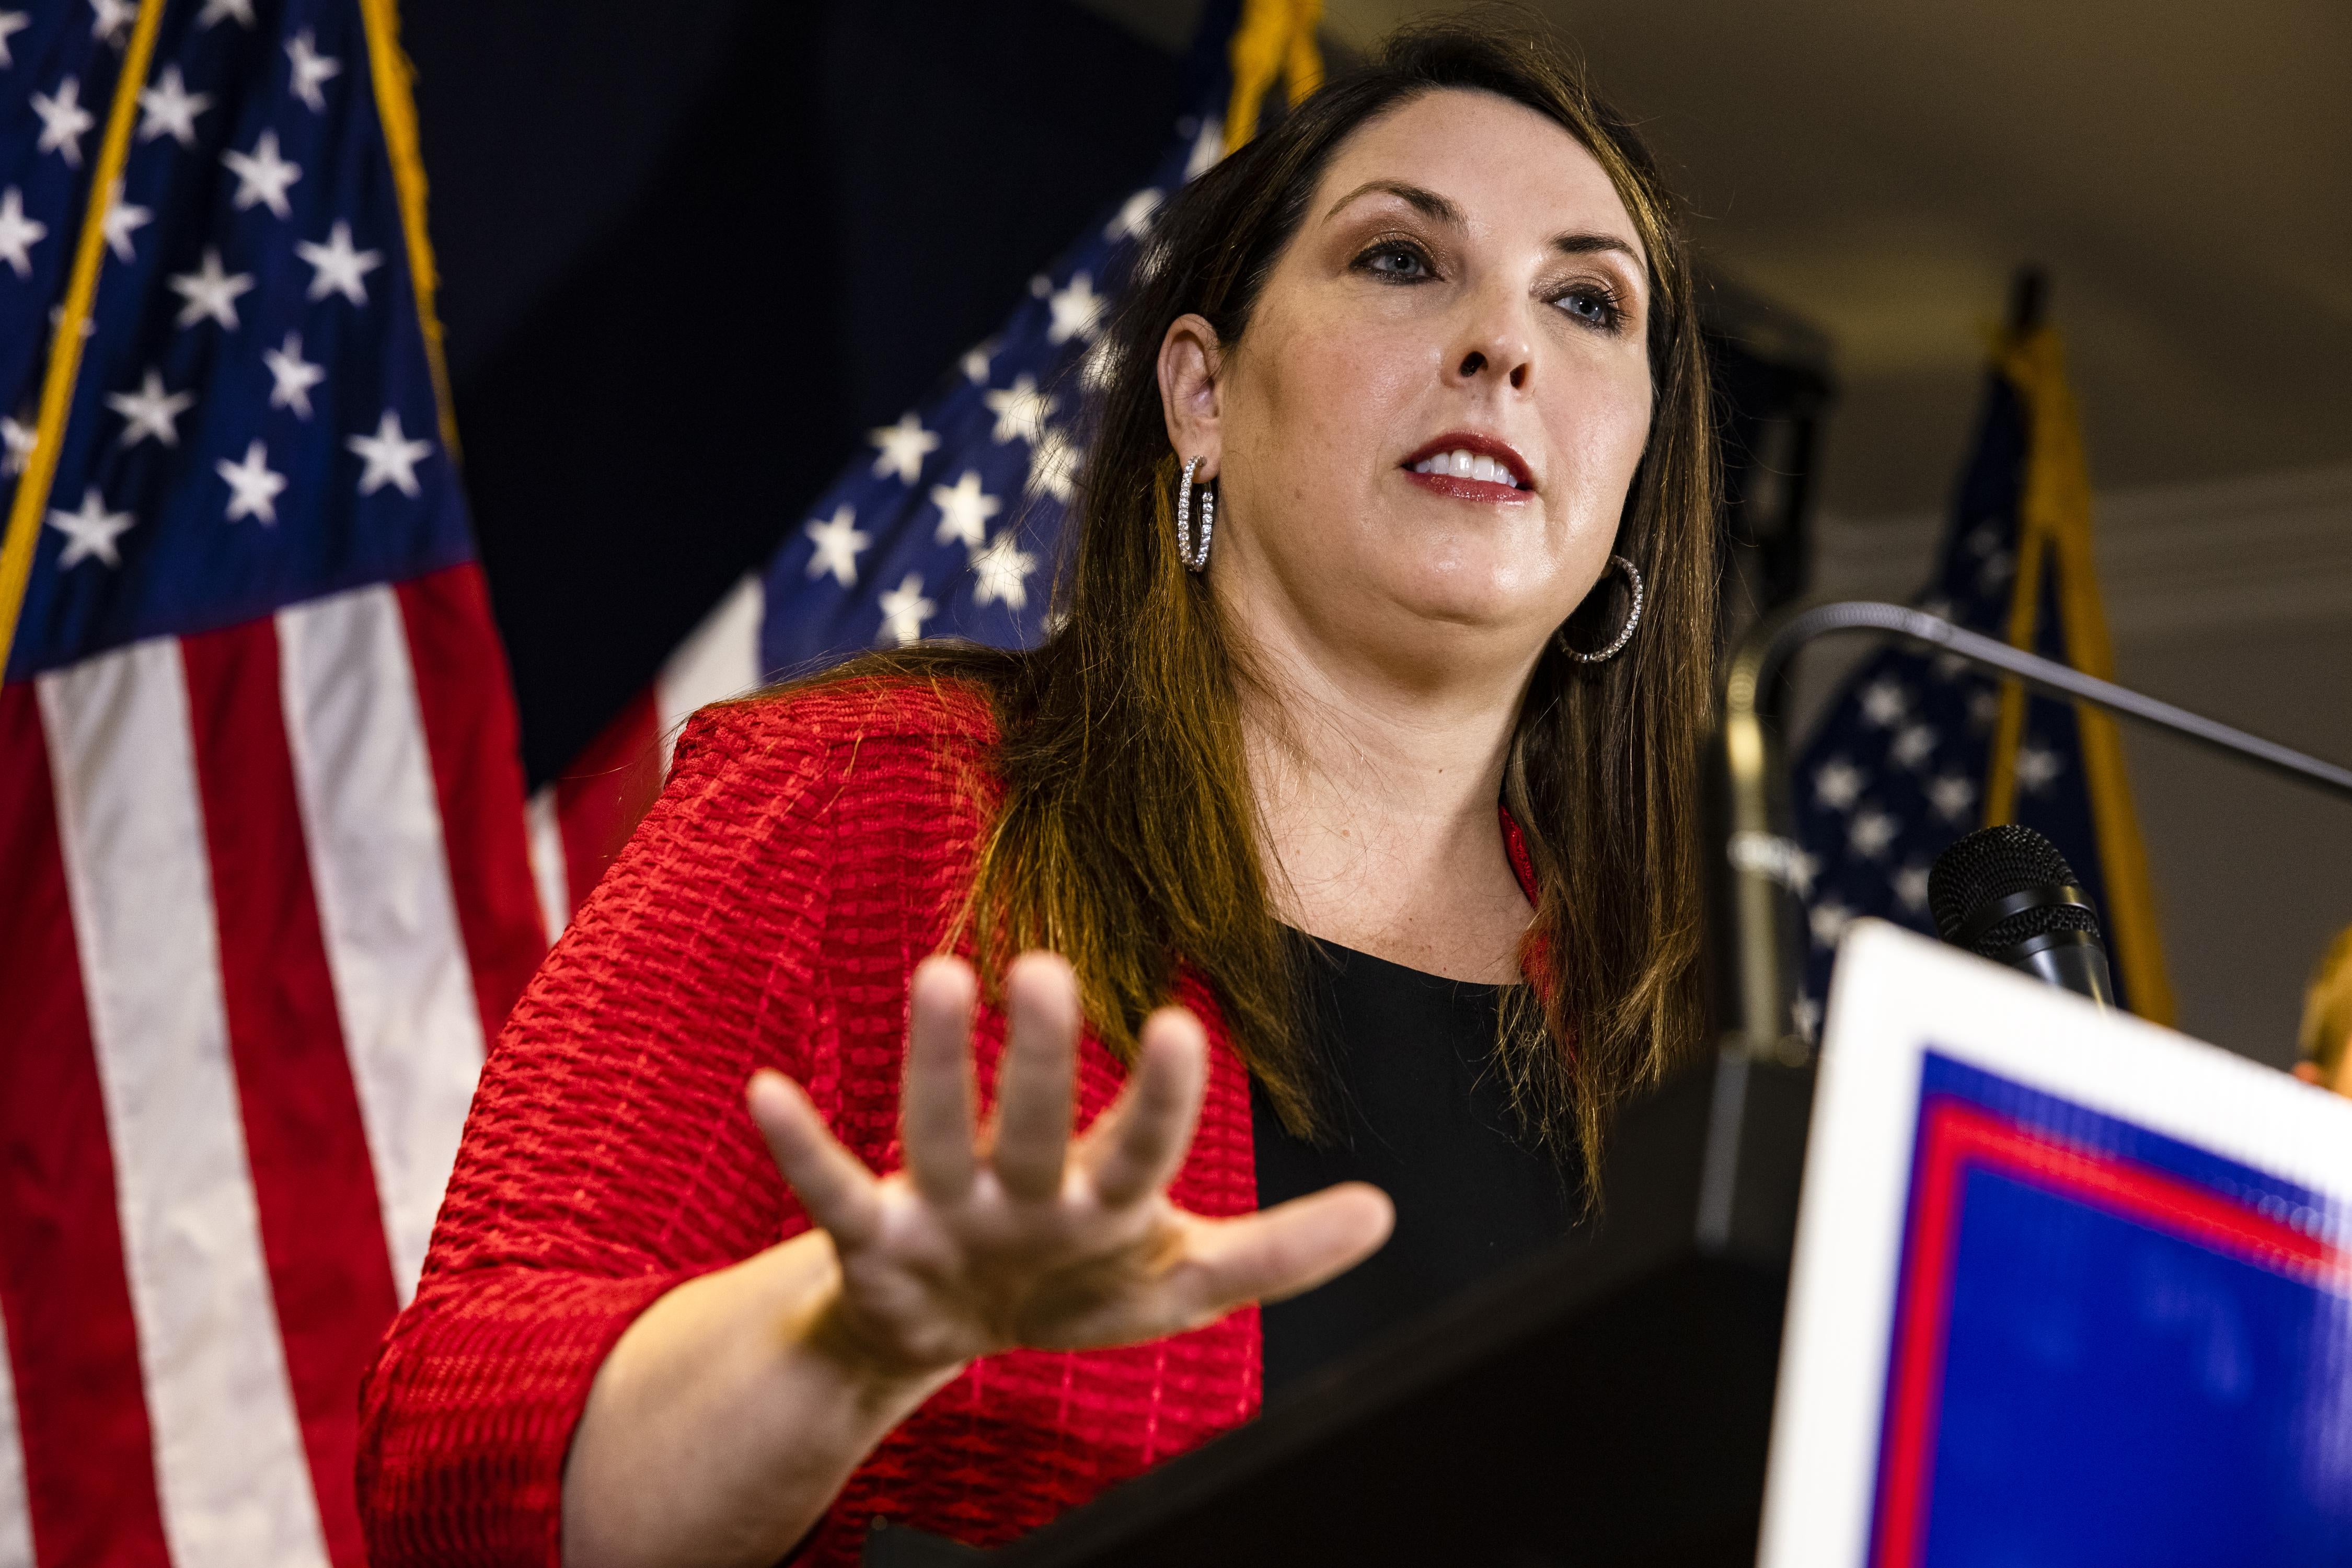 RNC Chairwoman Ronna McDaniel speaks during a press conference at the Republican National Committee headquarters on November 9, 2020 in Washington, D.C. 